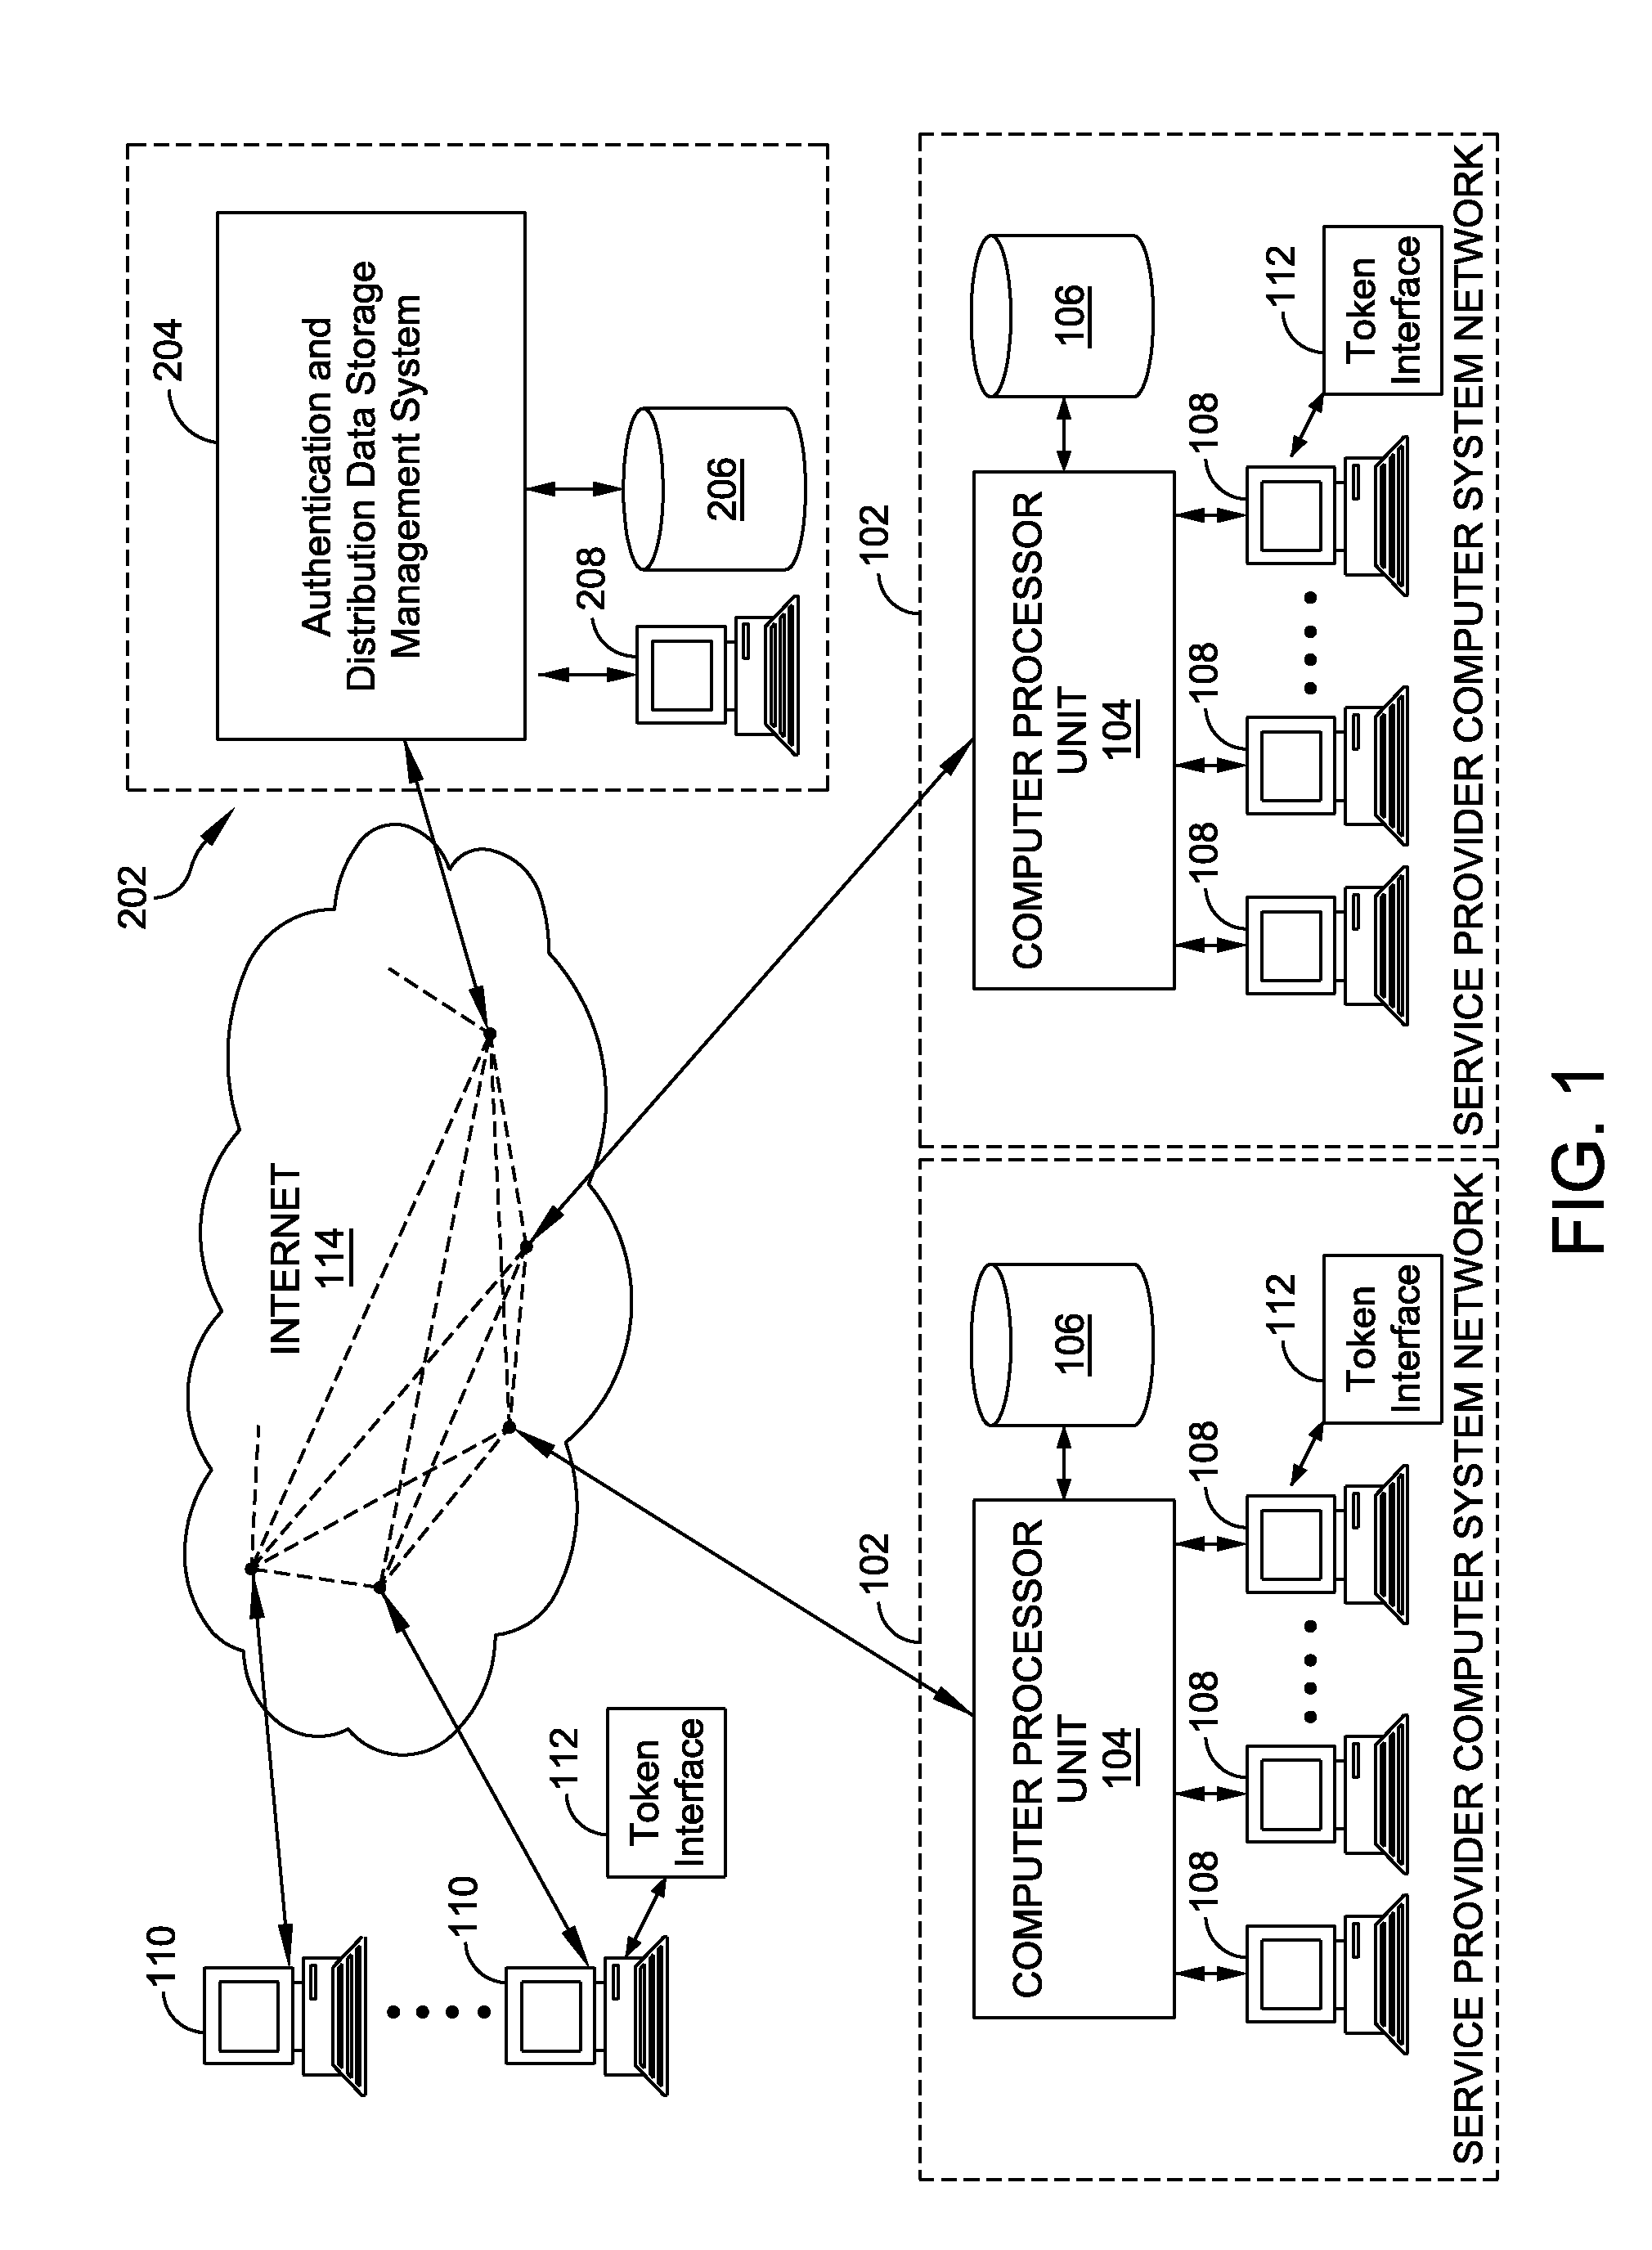 Centralized authentication system with safe private data storage and method